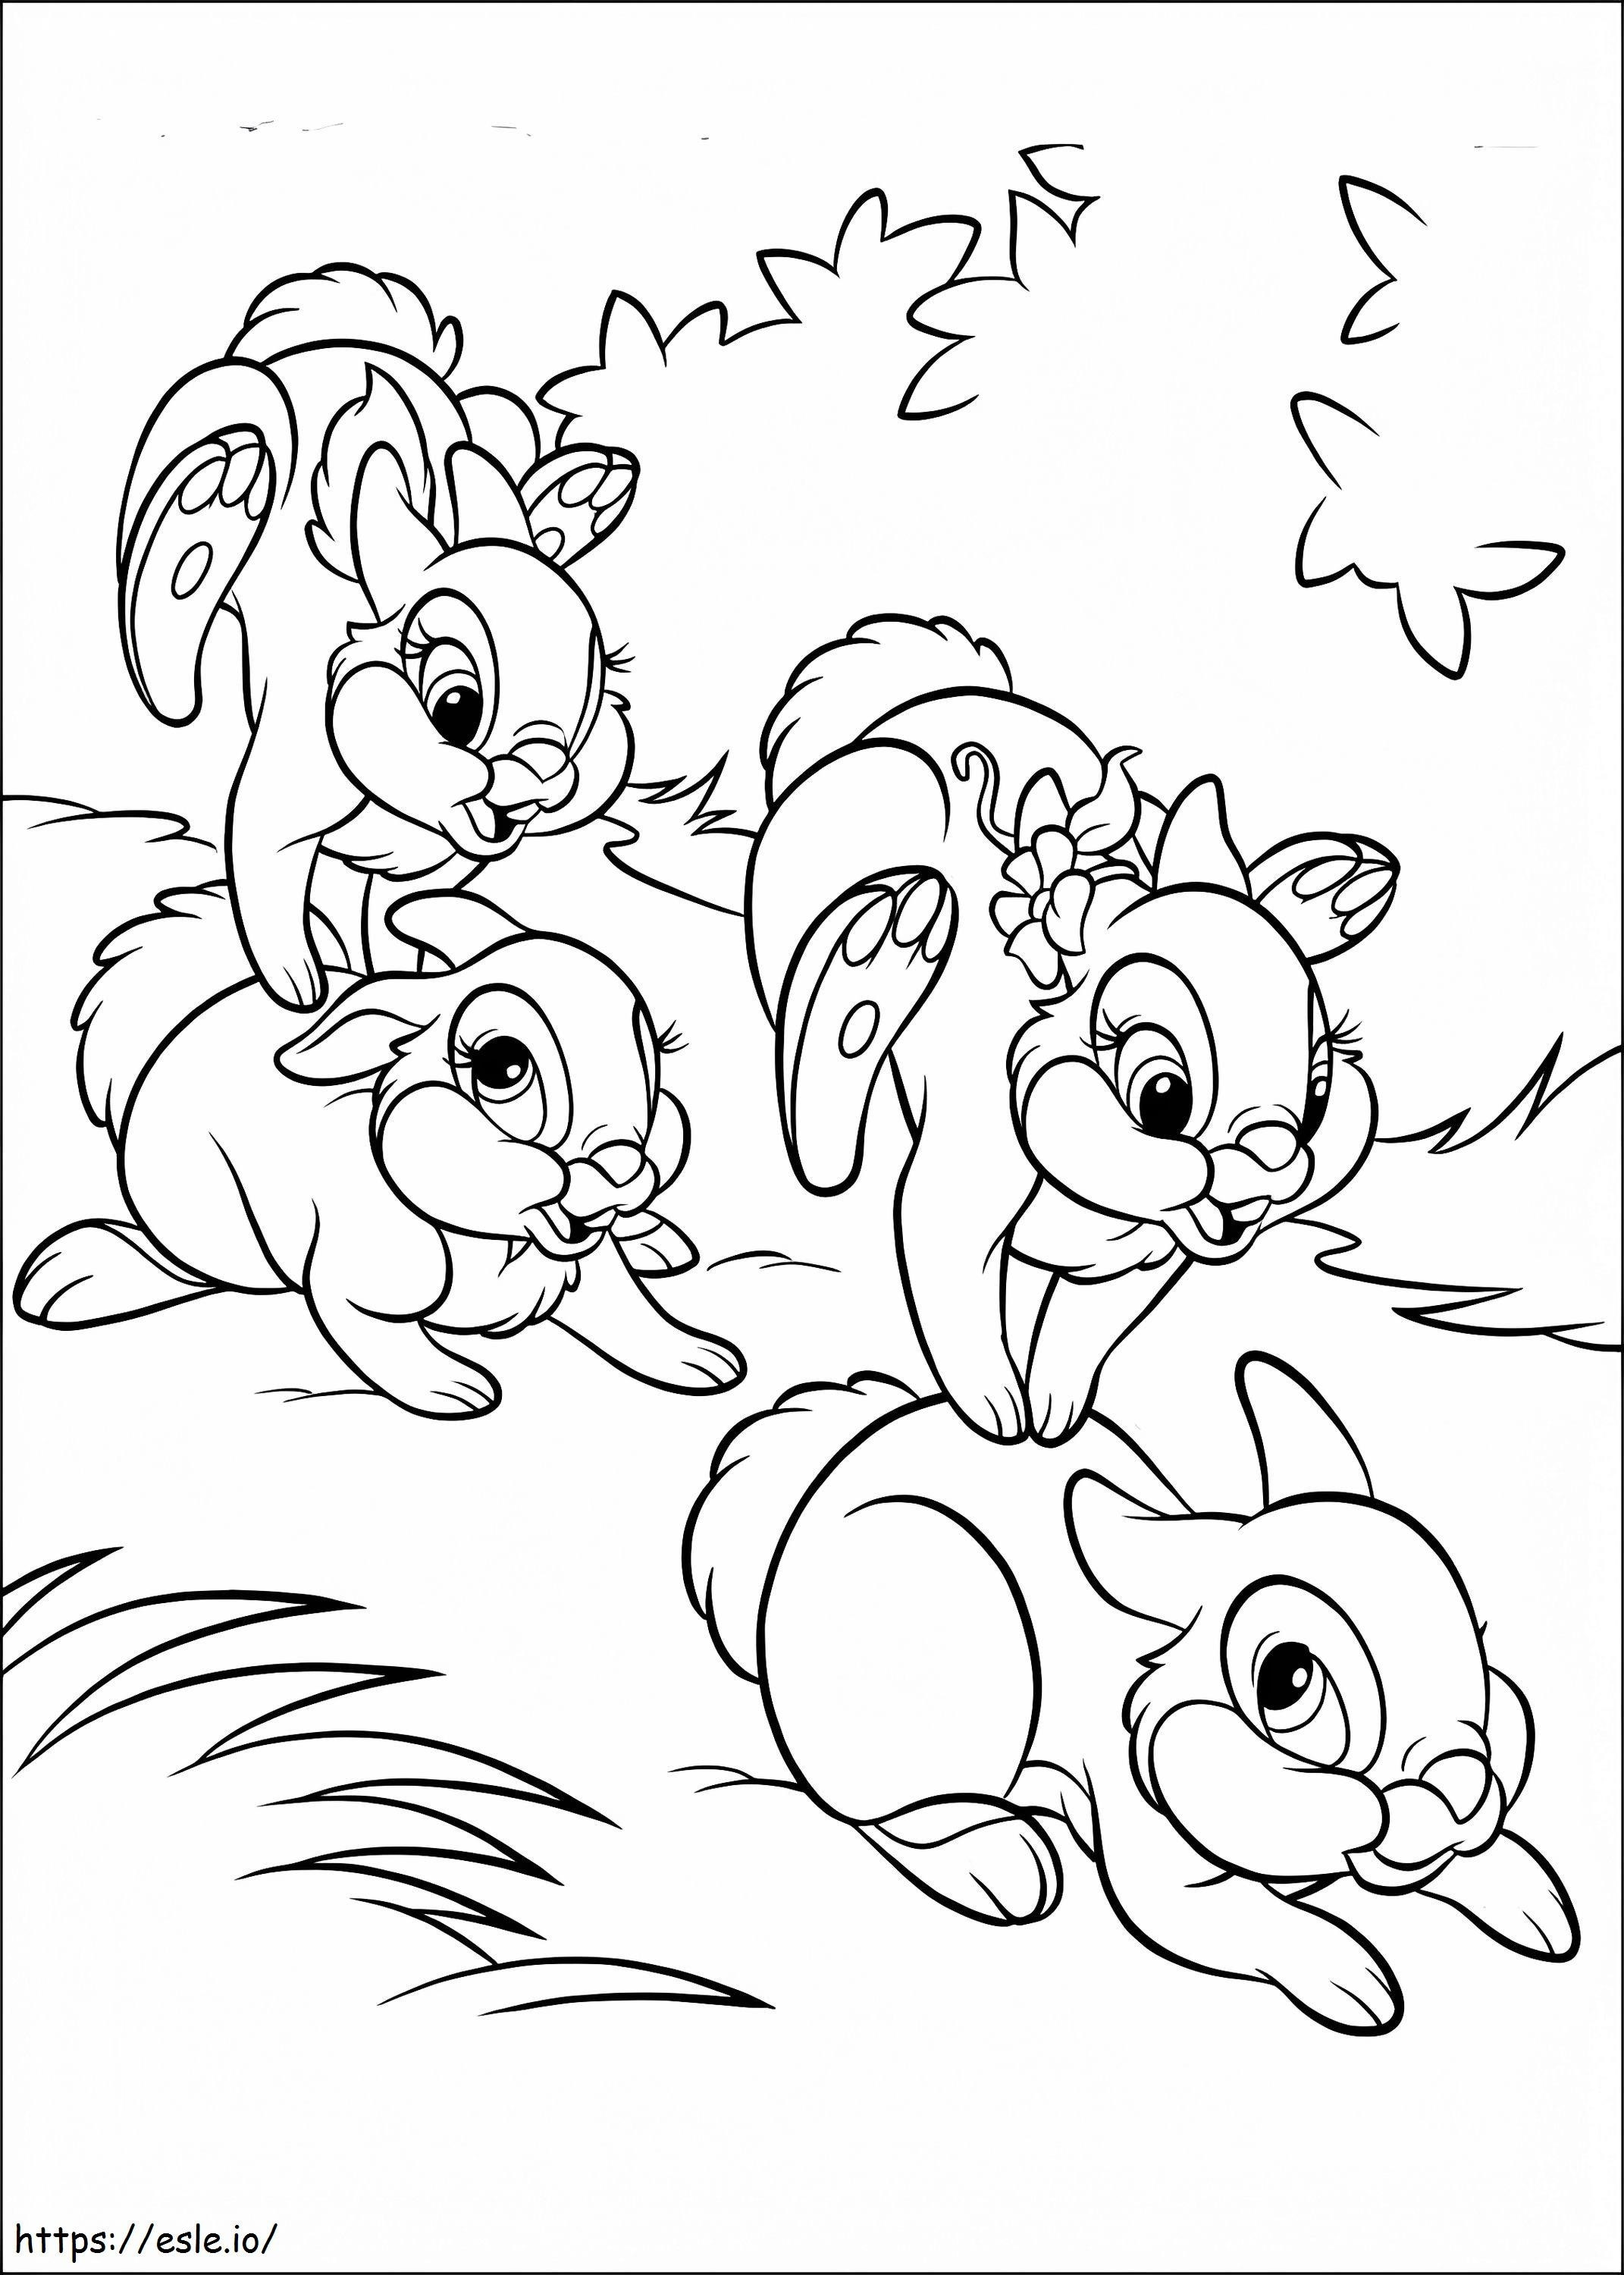 Four Bunny Running coloring page